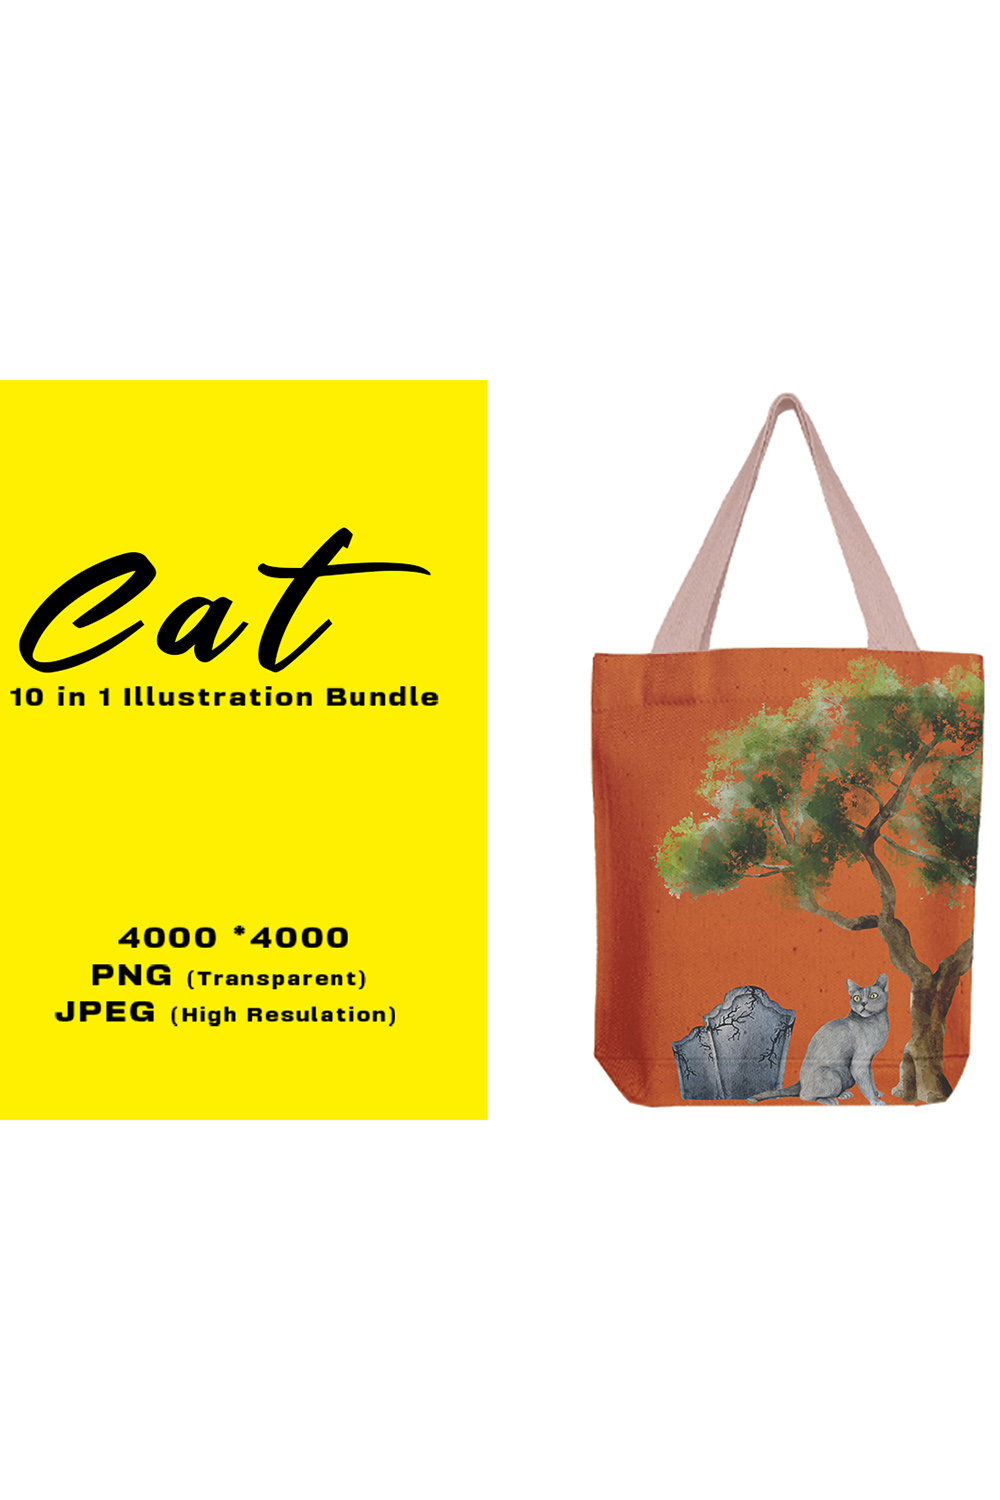 Image of a bag with a unique print with a cat